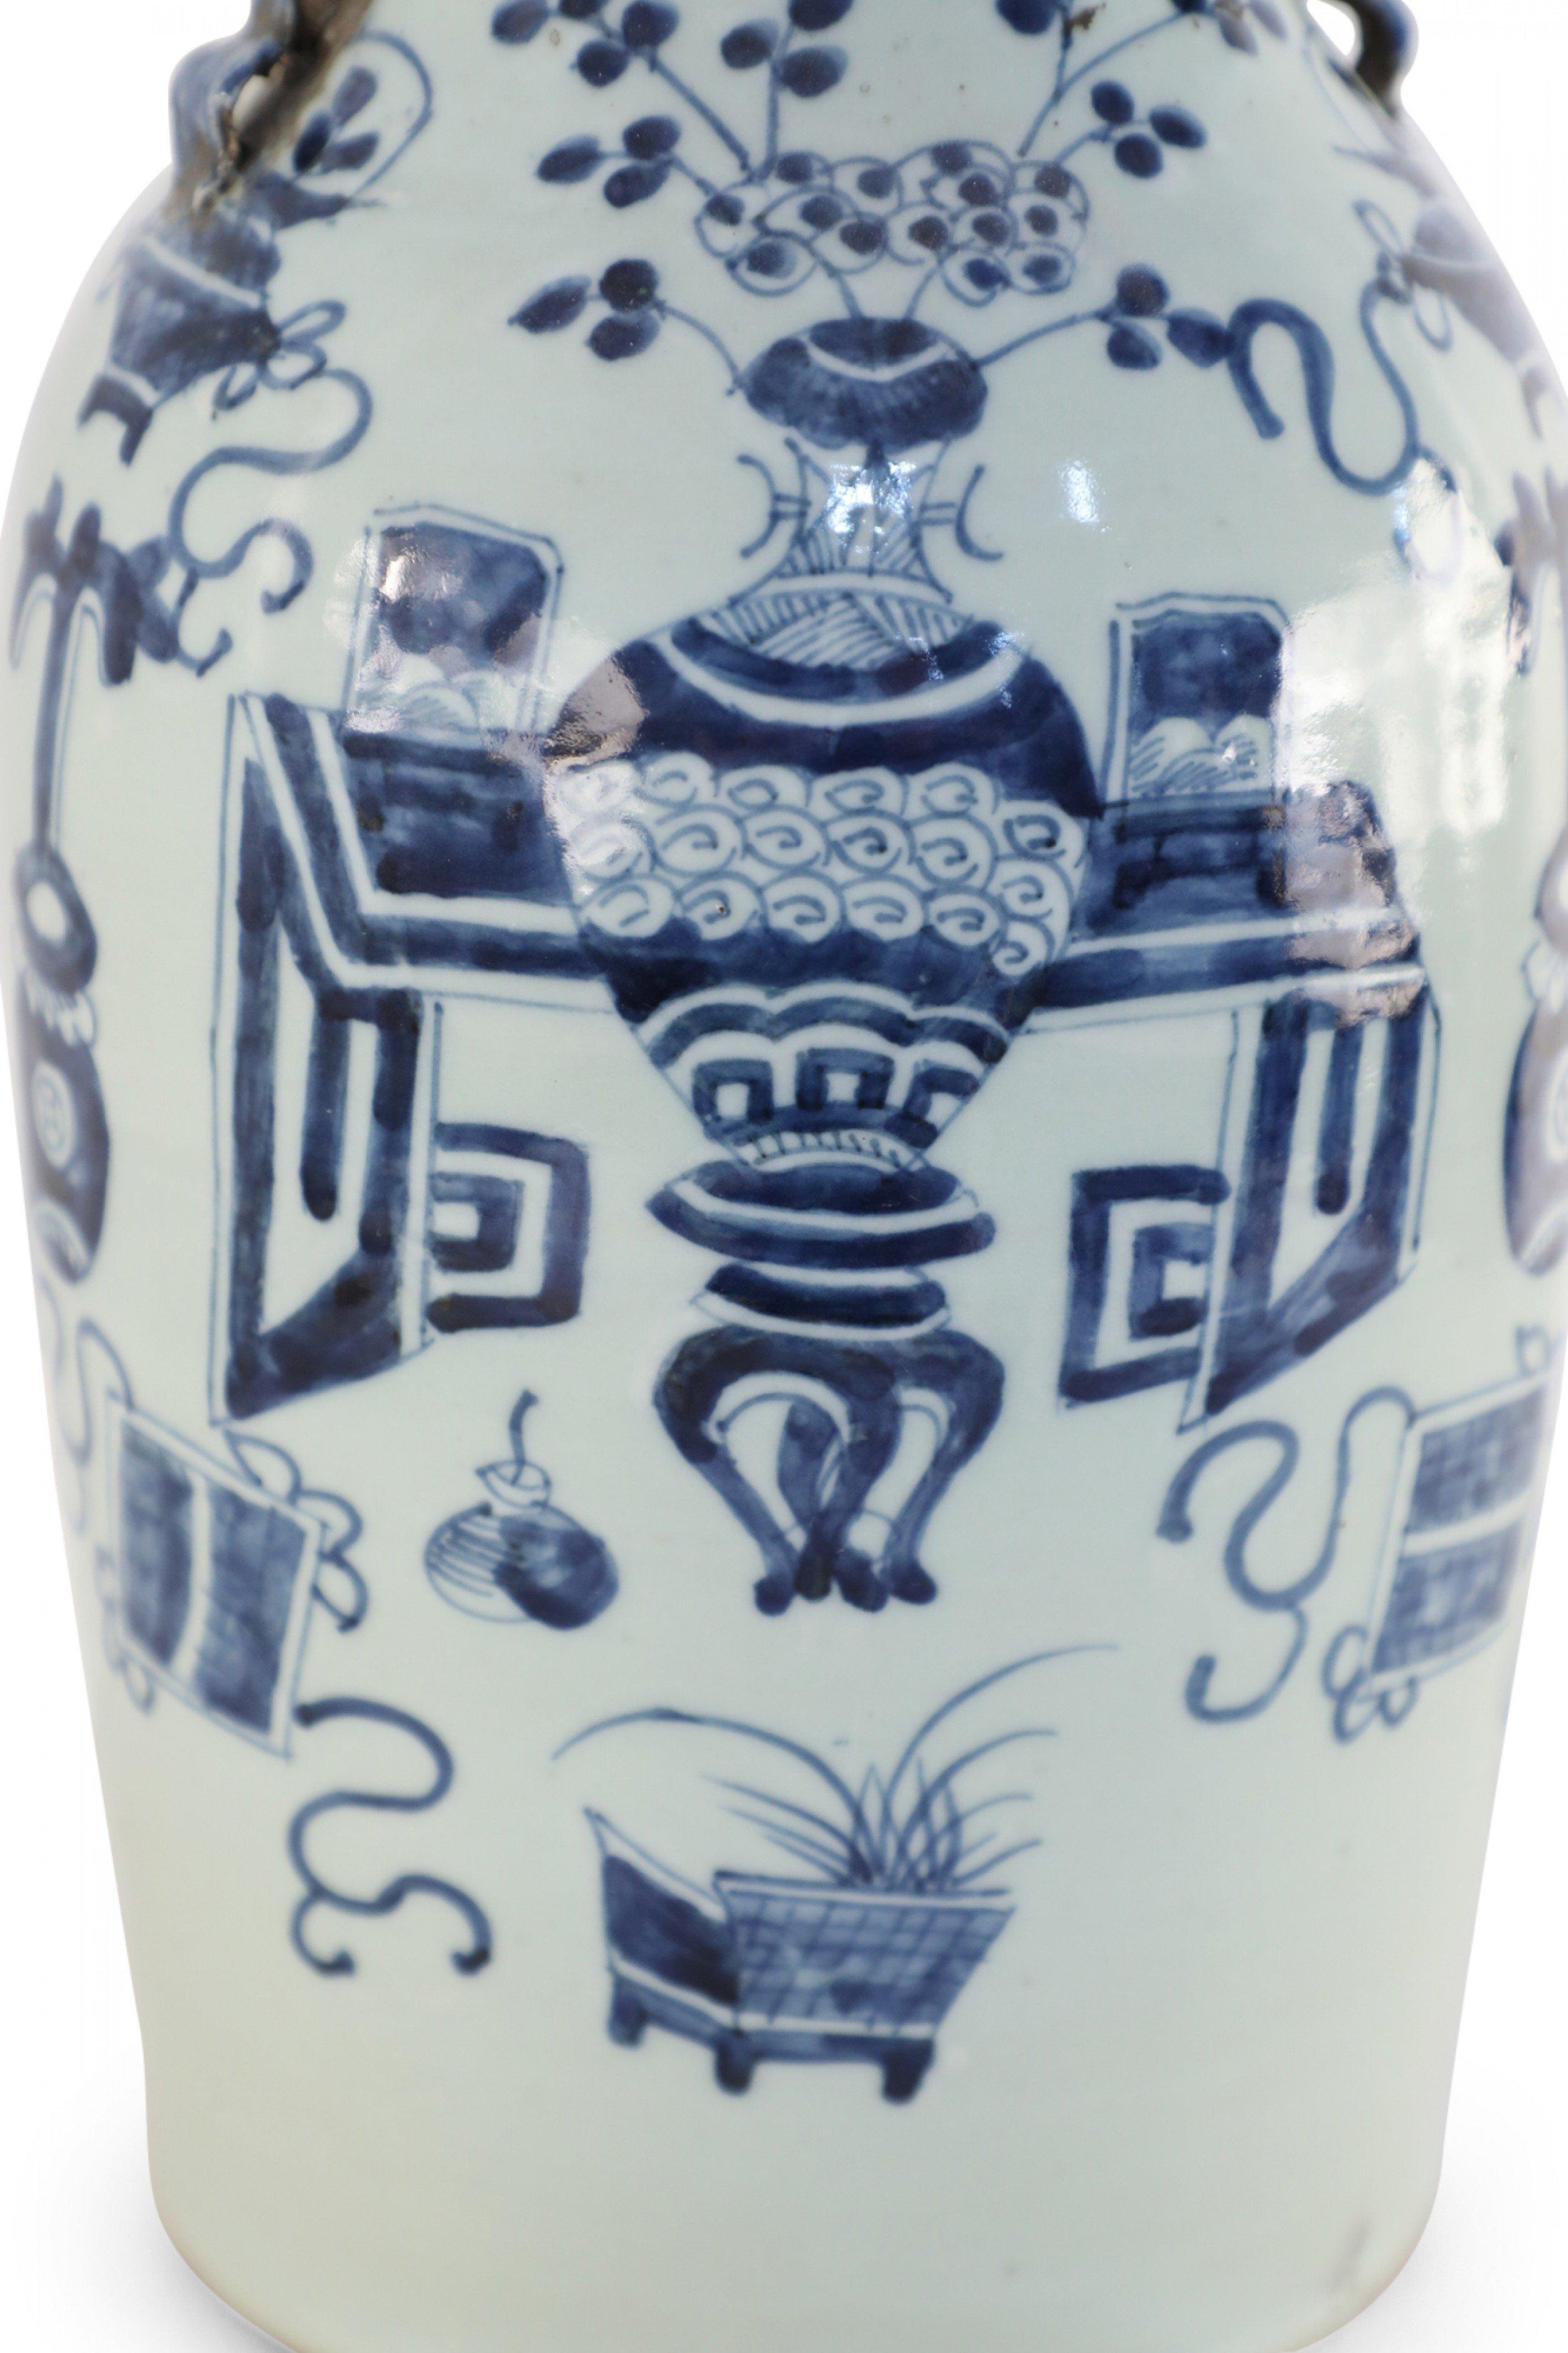 Antique Chinese (Late 19th Century) white porcelain urn painted with a blue pattern featuring urns, furniture, and florals with blue scrolled handles on the neck.
  